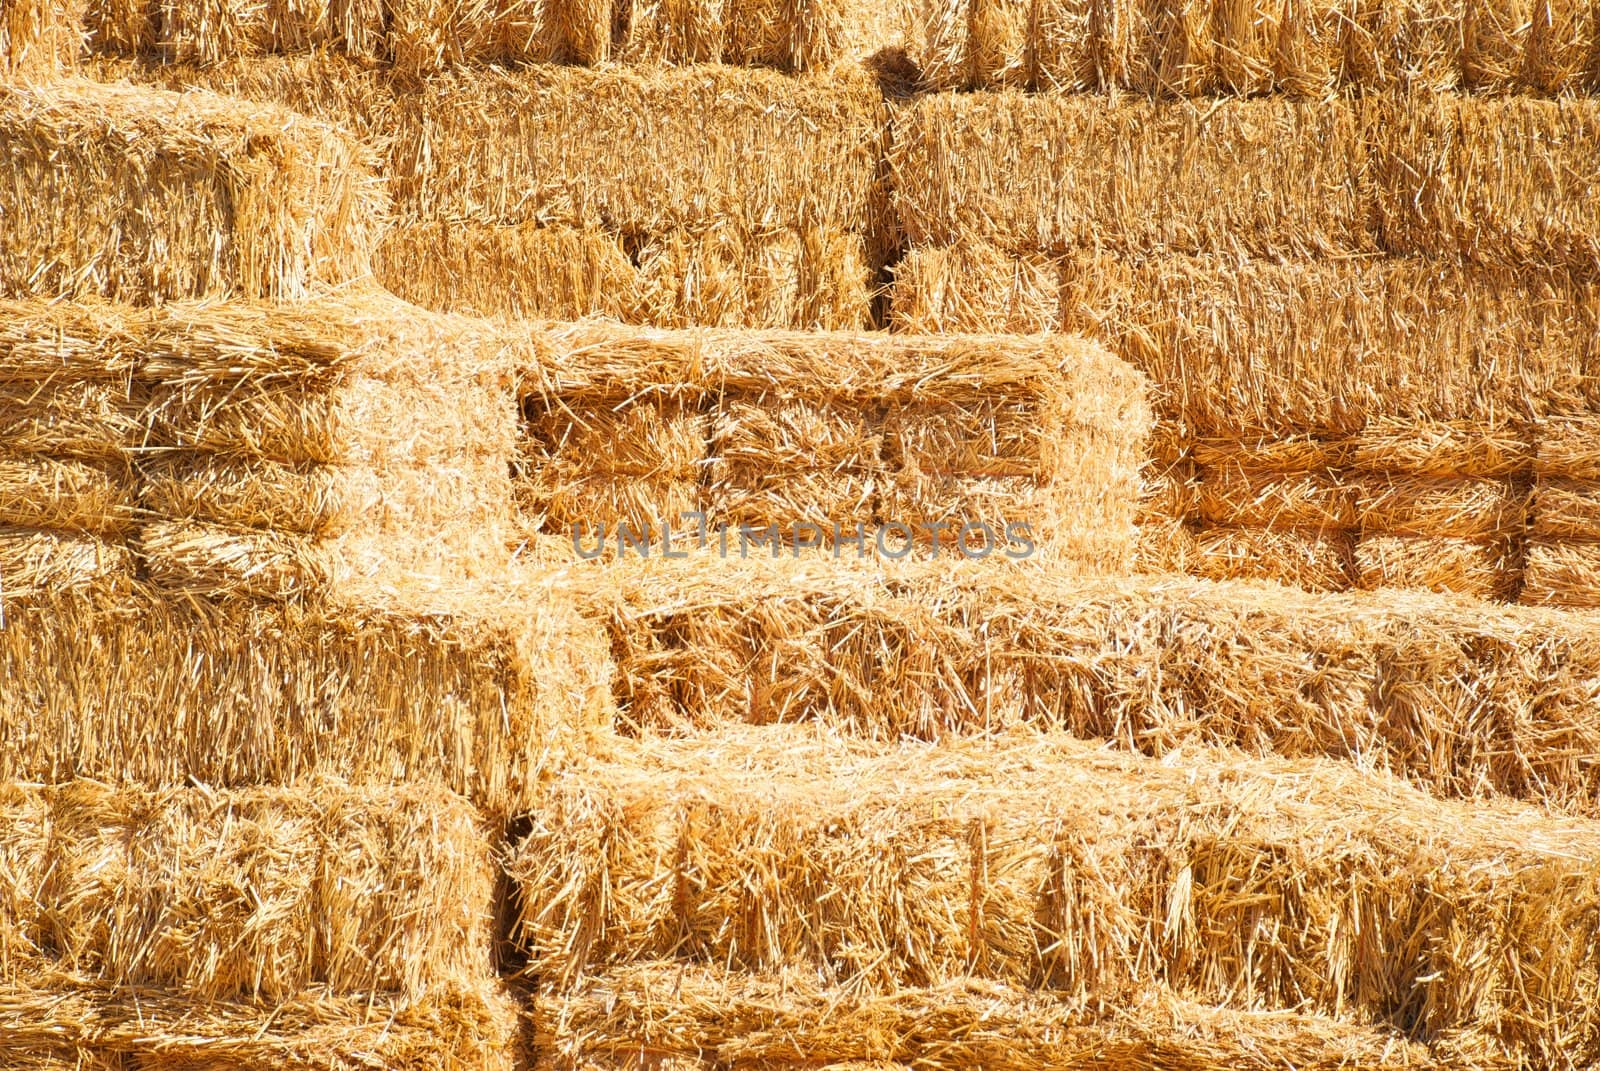 Horizontal Stack of Hay Bailes by pixelsnap